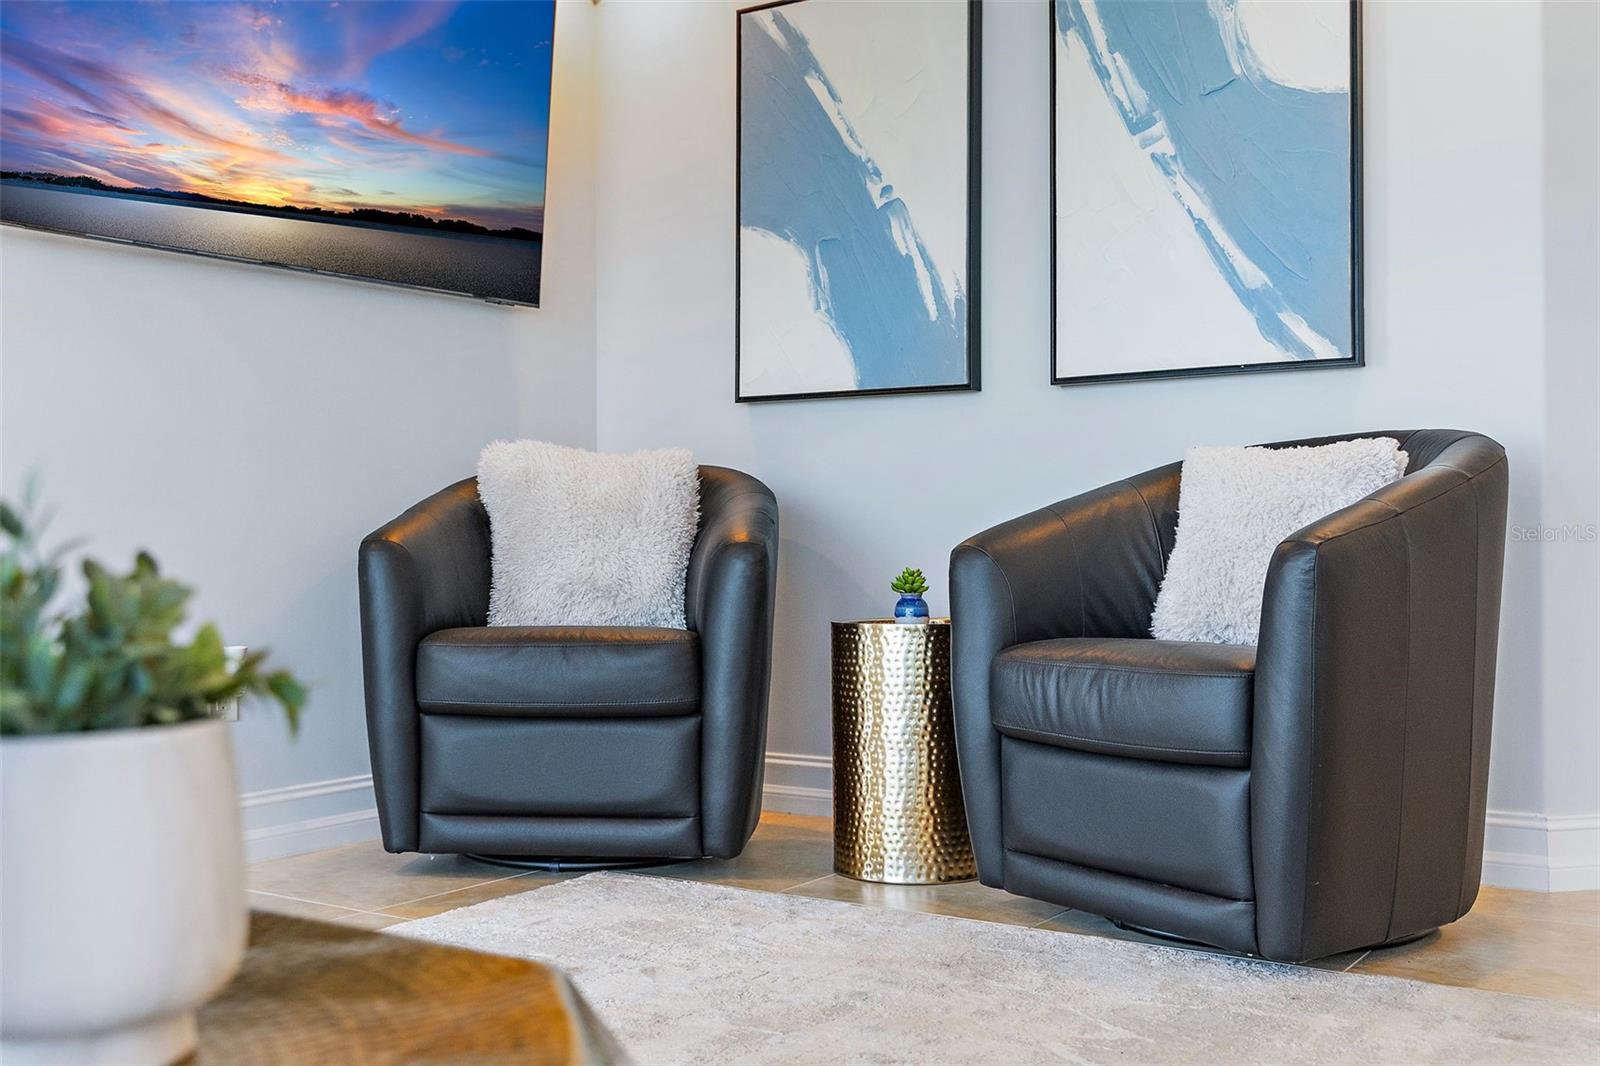 This corner of the living room area provides a cozy corner for chatting, enjoying a beverage and having a 1:1 with your bestie!